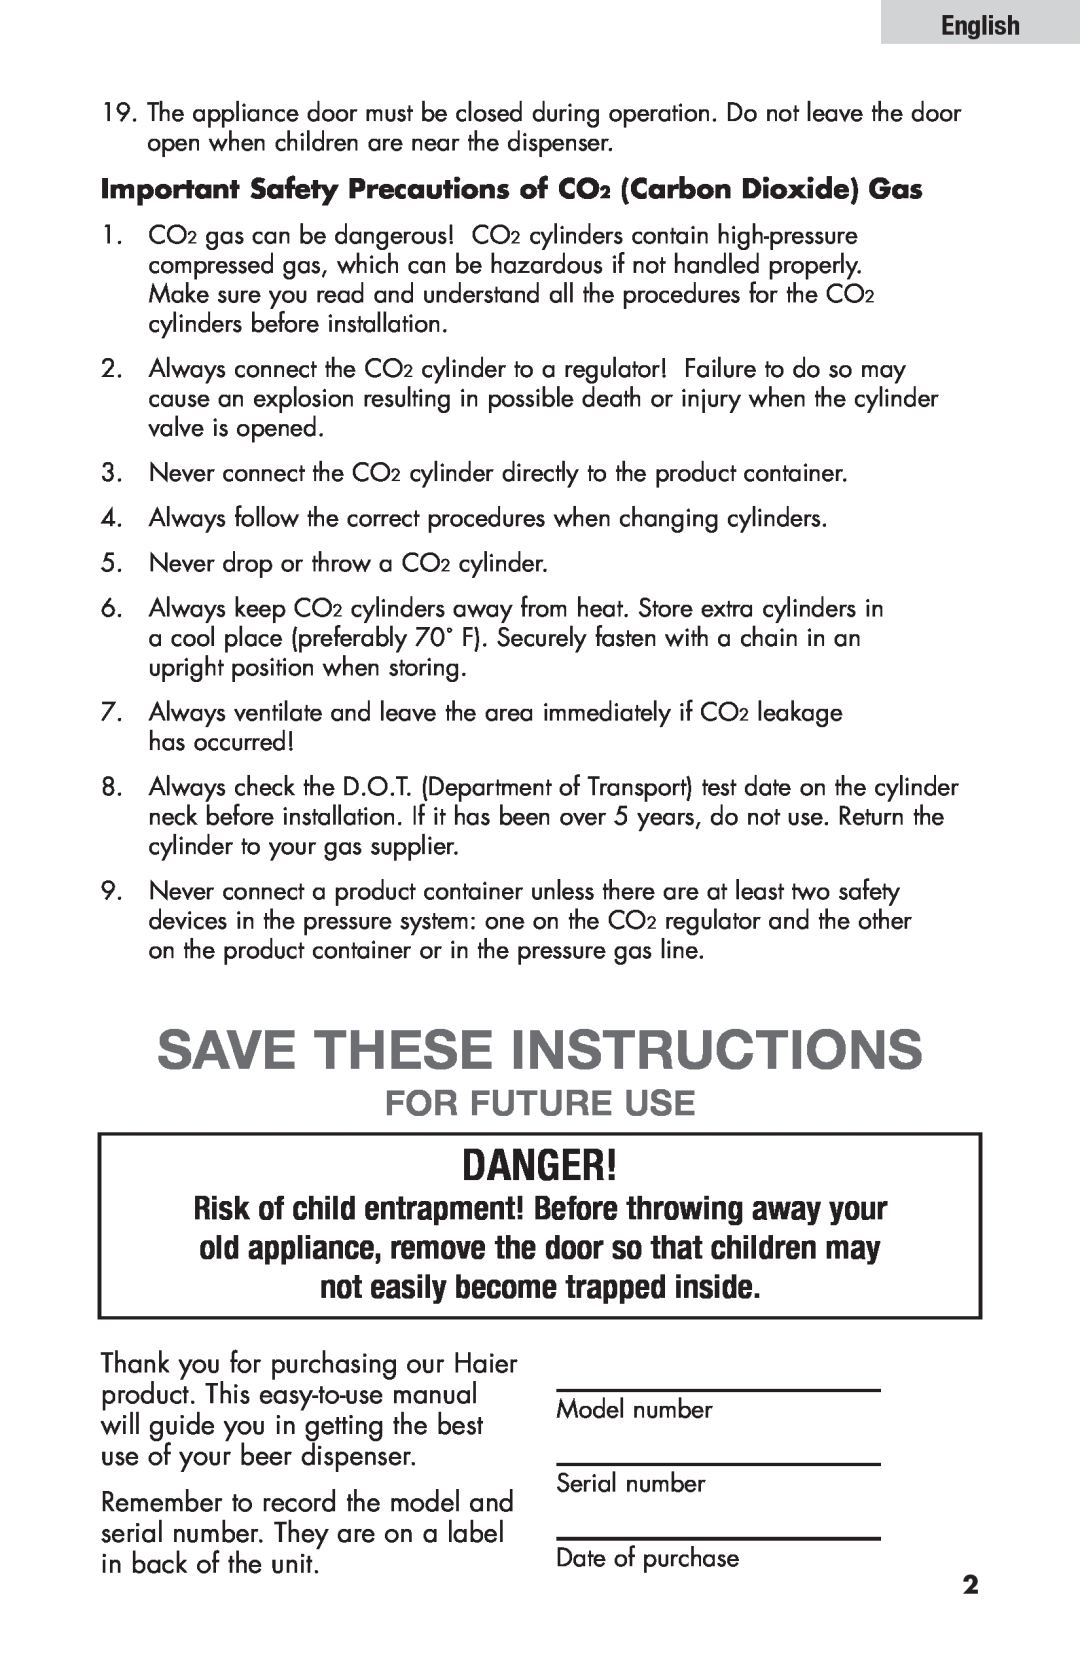 Haier HBF205E Save These Instructions, Danger, For Future Use, Important Safety Precautions of CO2 Carbon Dioxide Gas 